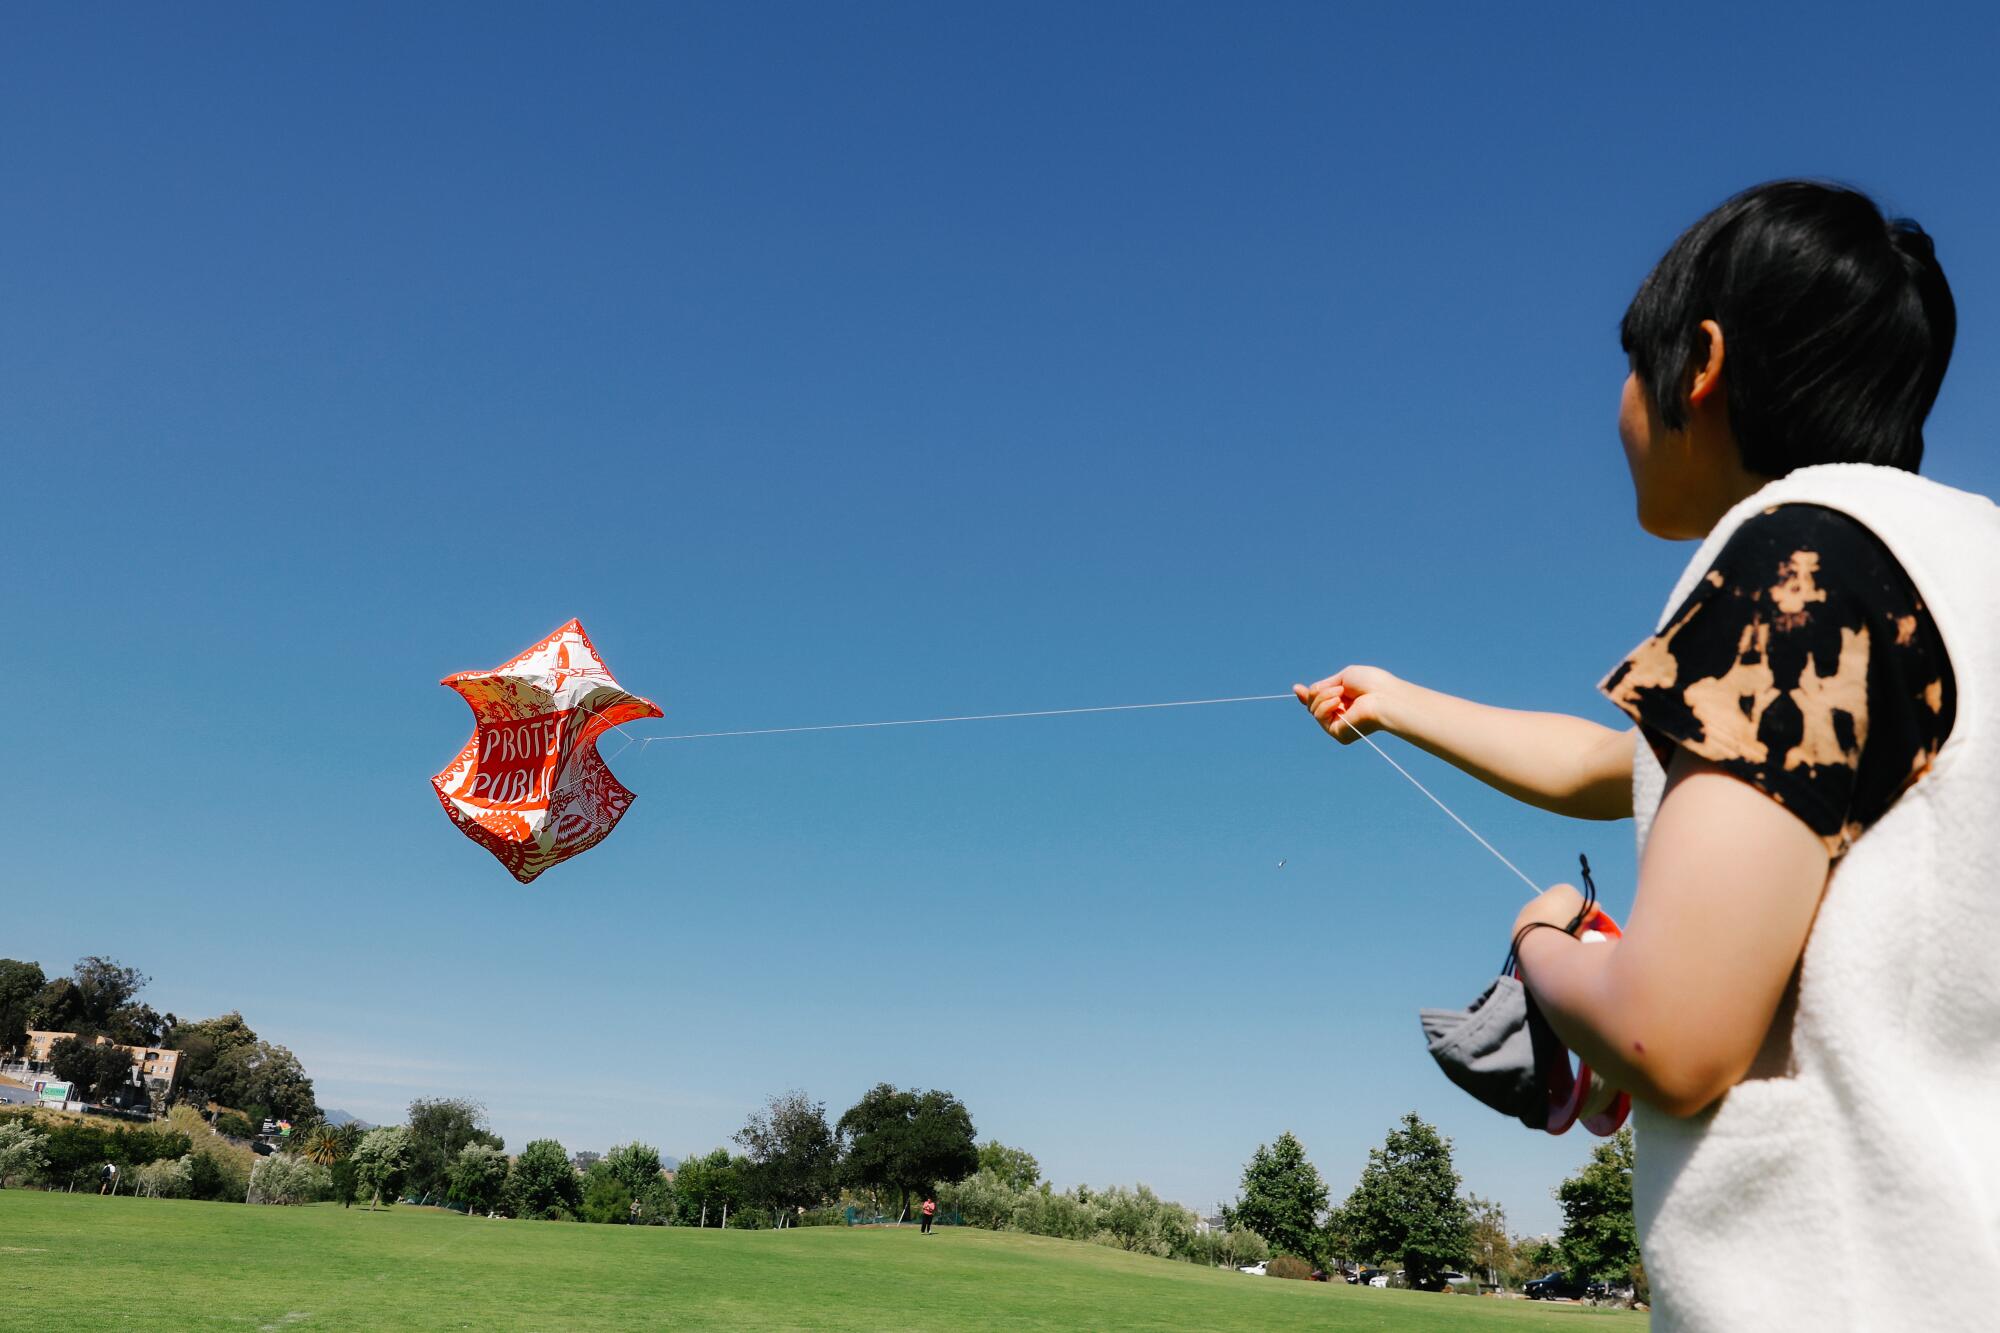 Artist and kitemaker Stevie Choi tests out a kite at Los Angeles State Historic Park.